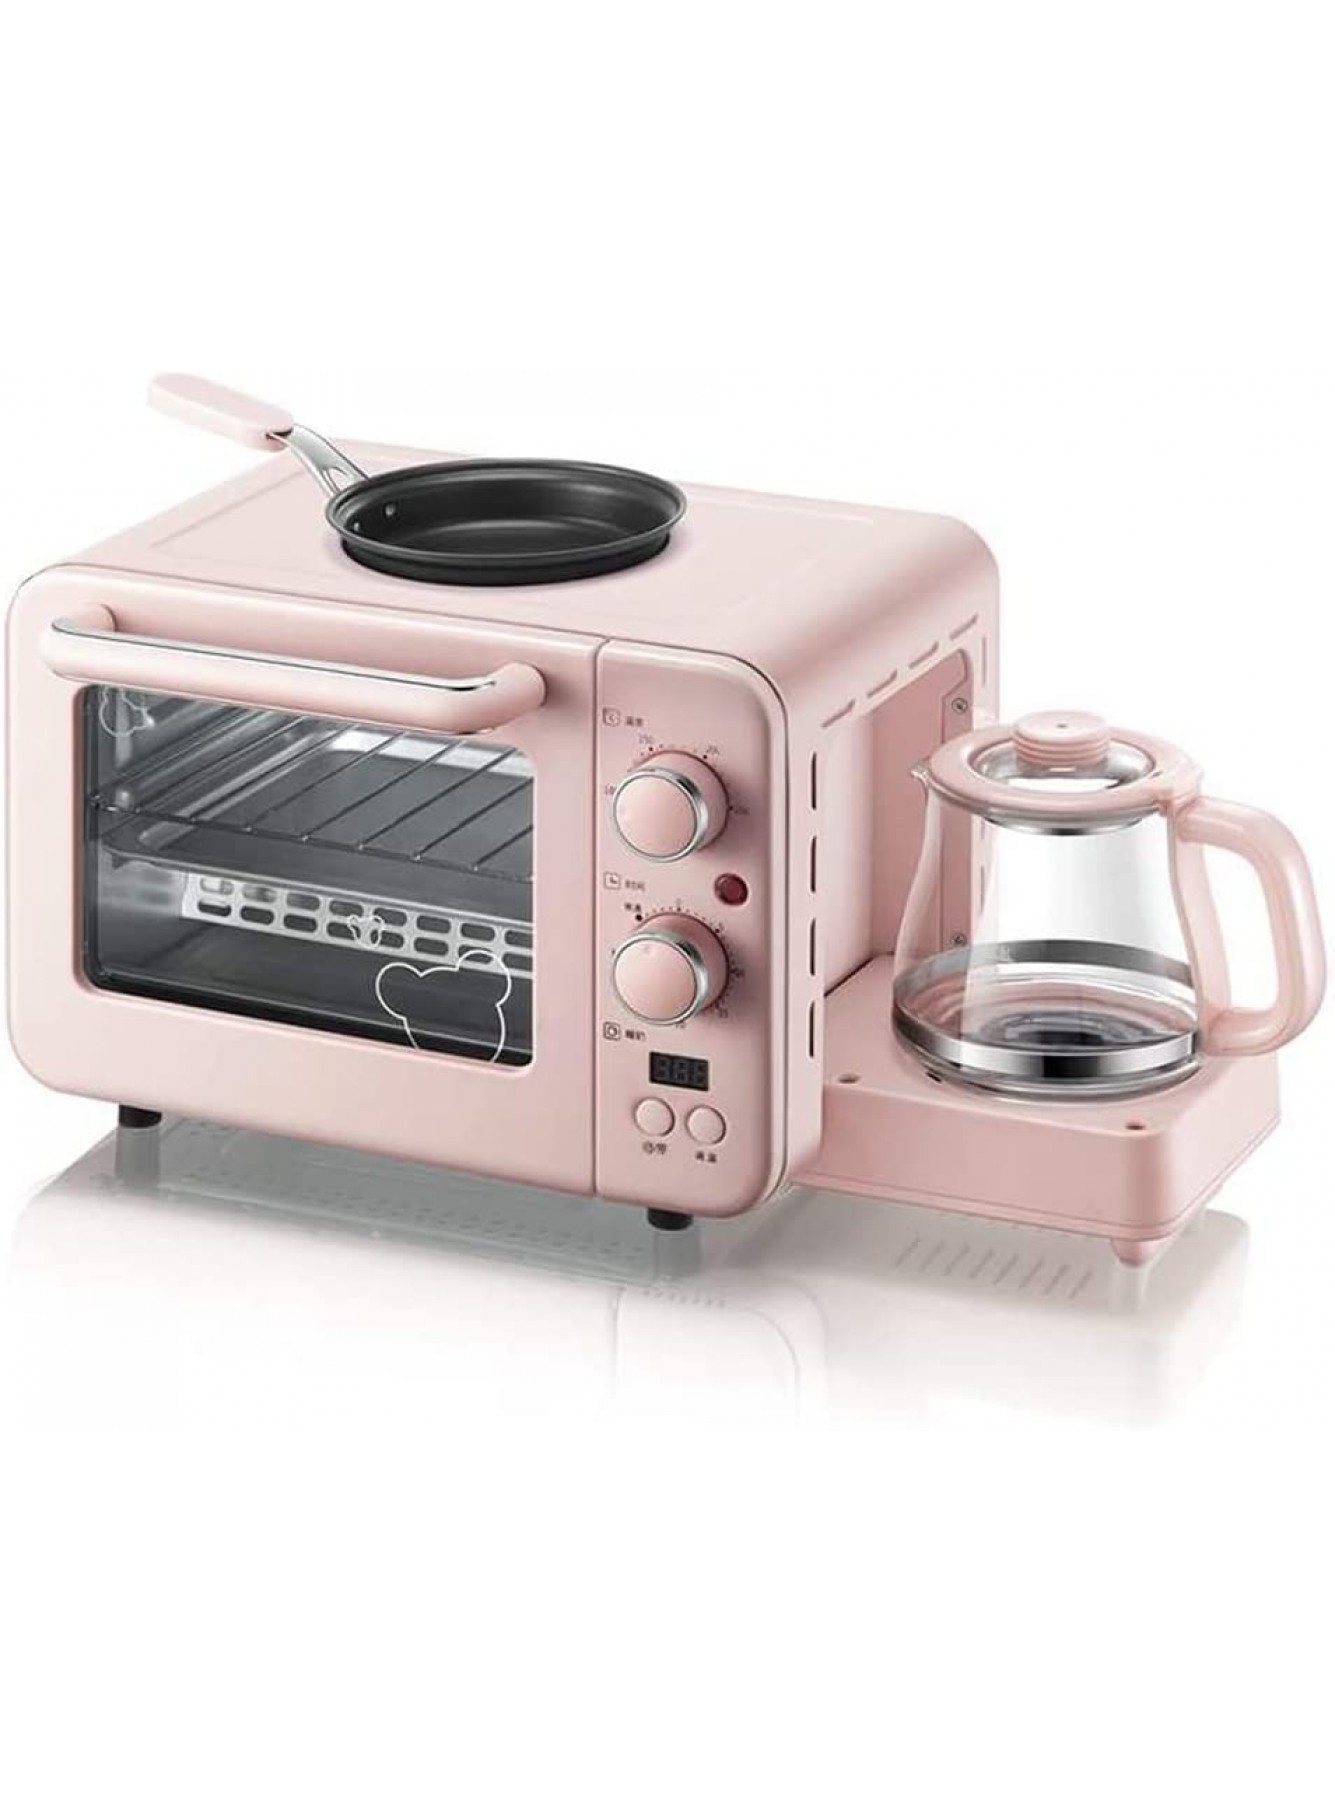 HKO Multifunction 3 In 1 Breakfast Machine 8L Electric Mini Oven Maker Eggs Frying Pan Household Bread Pizza Oven Grill oven B09WMXBQGM